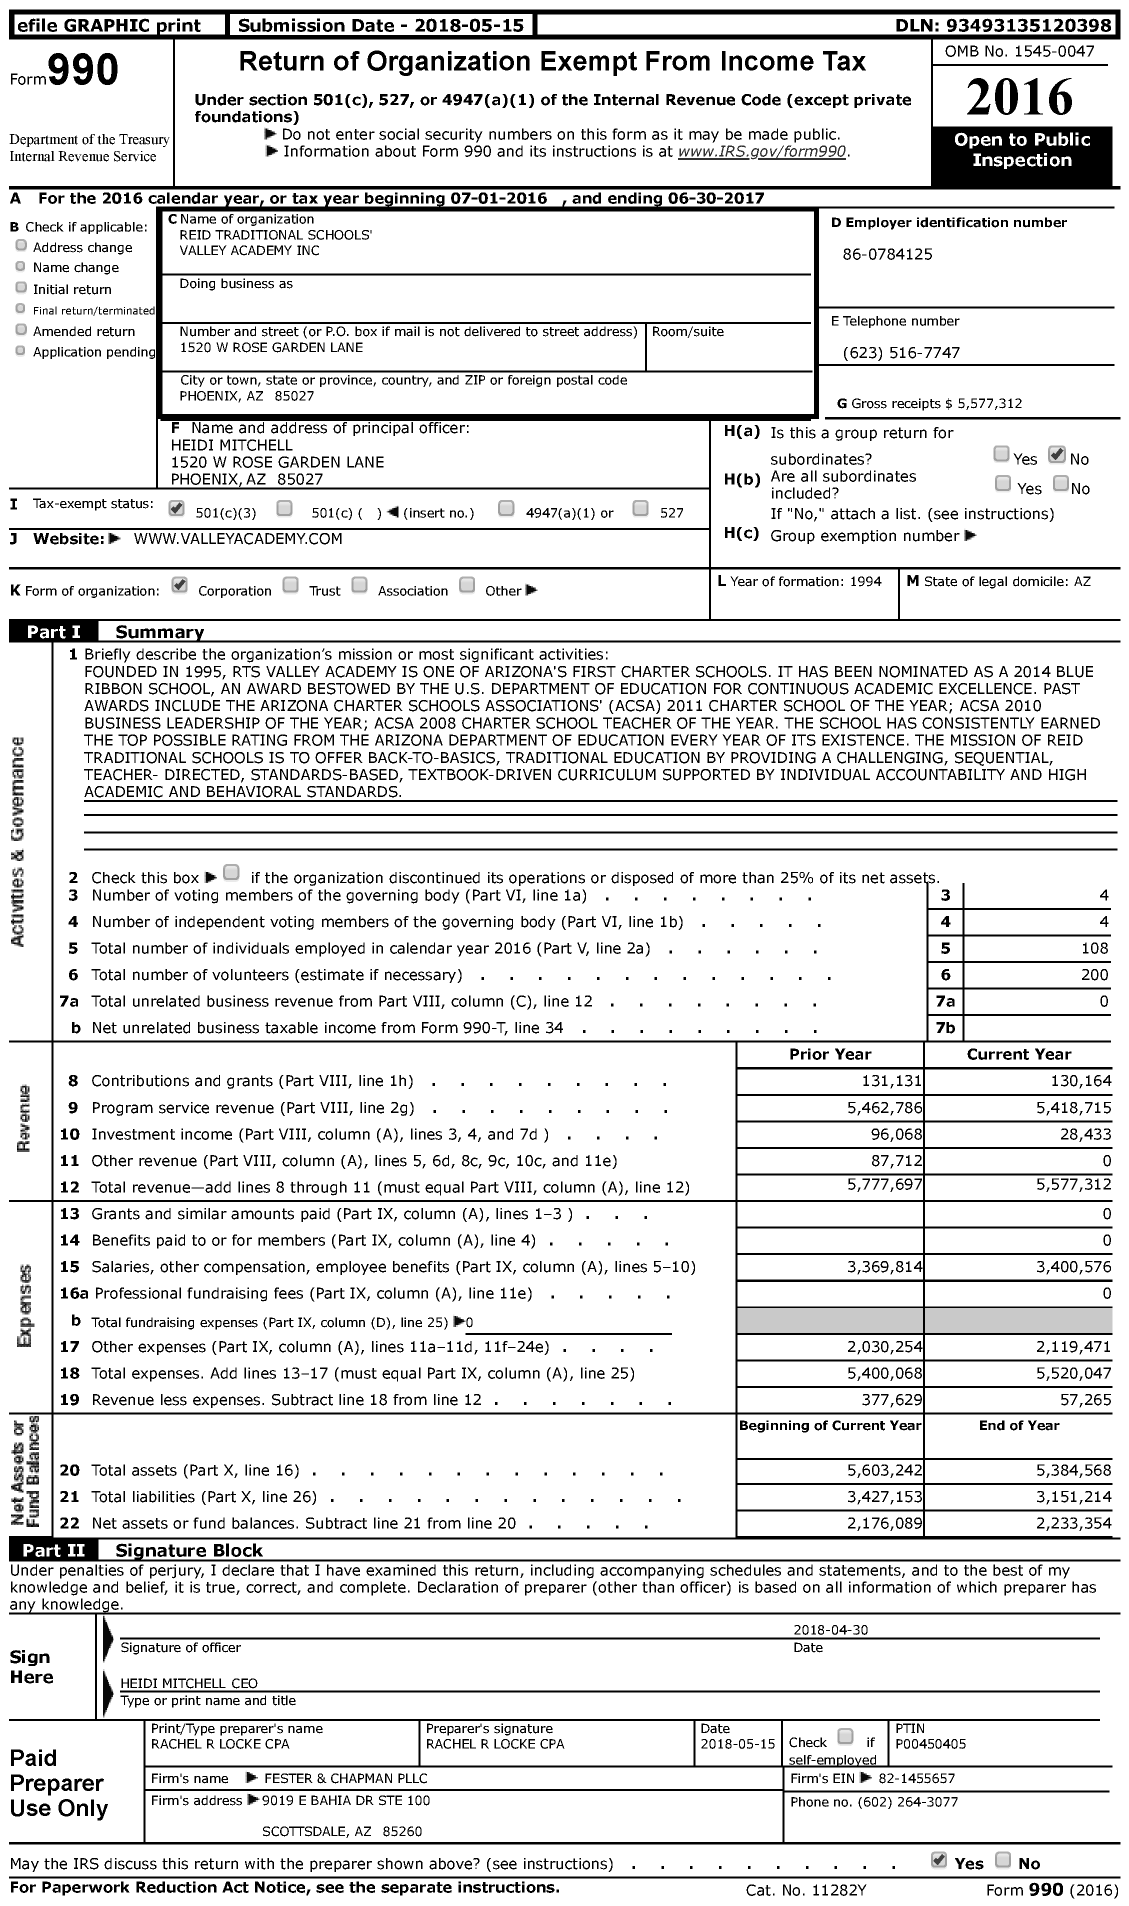 Image of first page of 2016 Form 990 for Reid Traditional Schools' Valley Academy